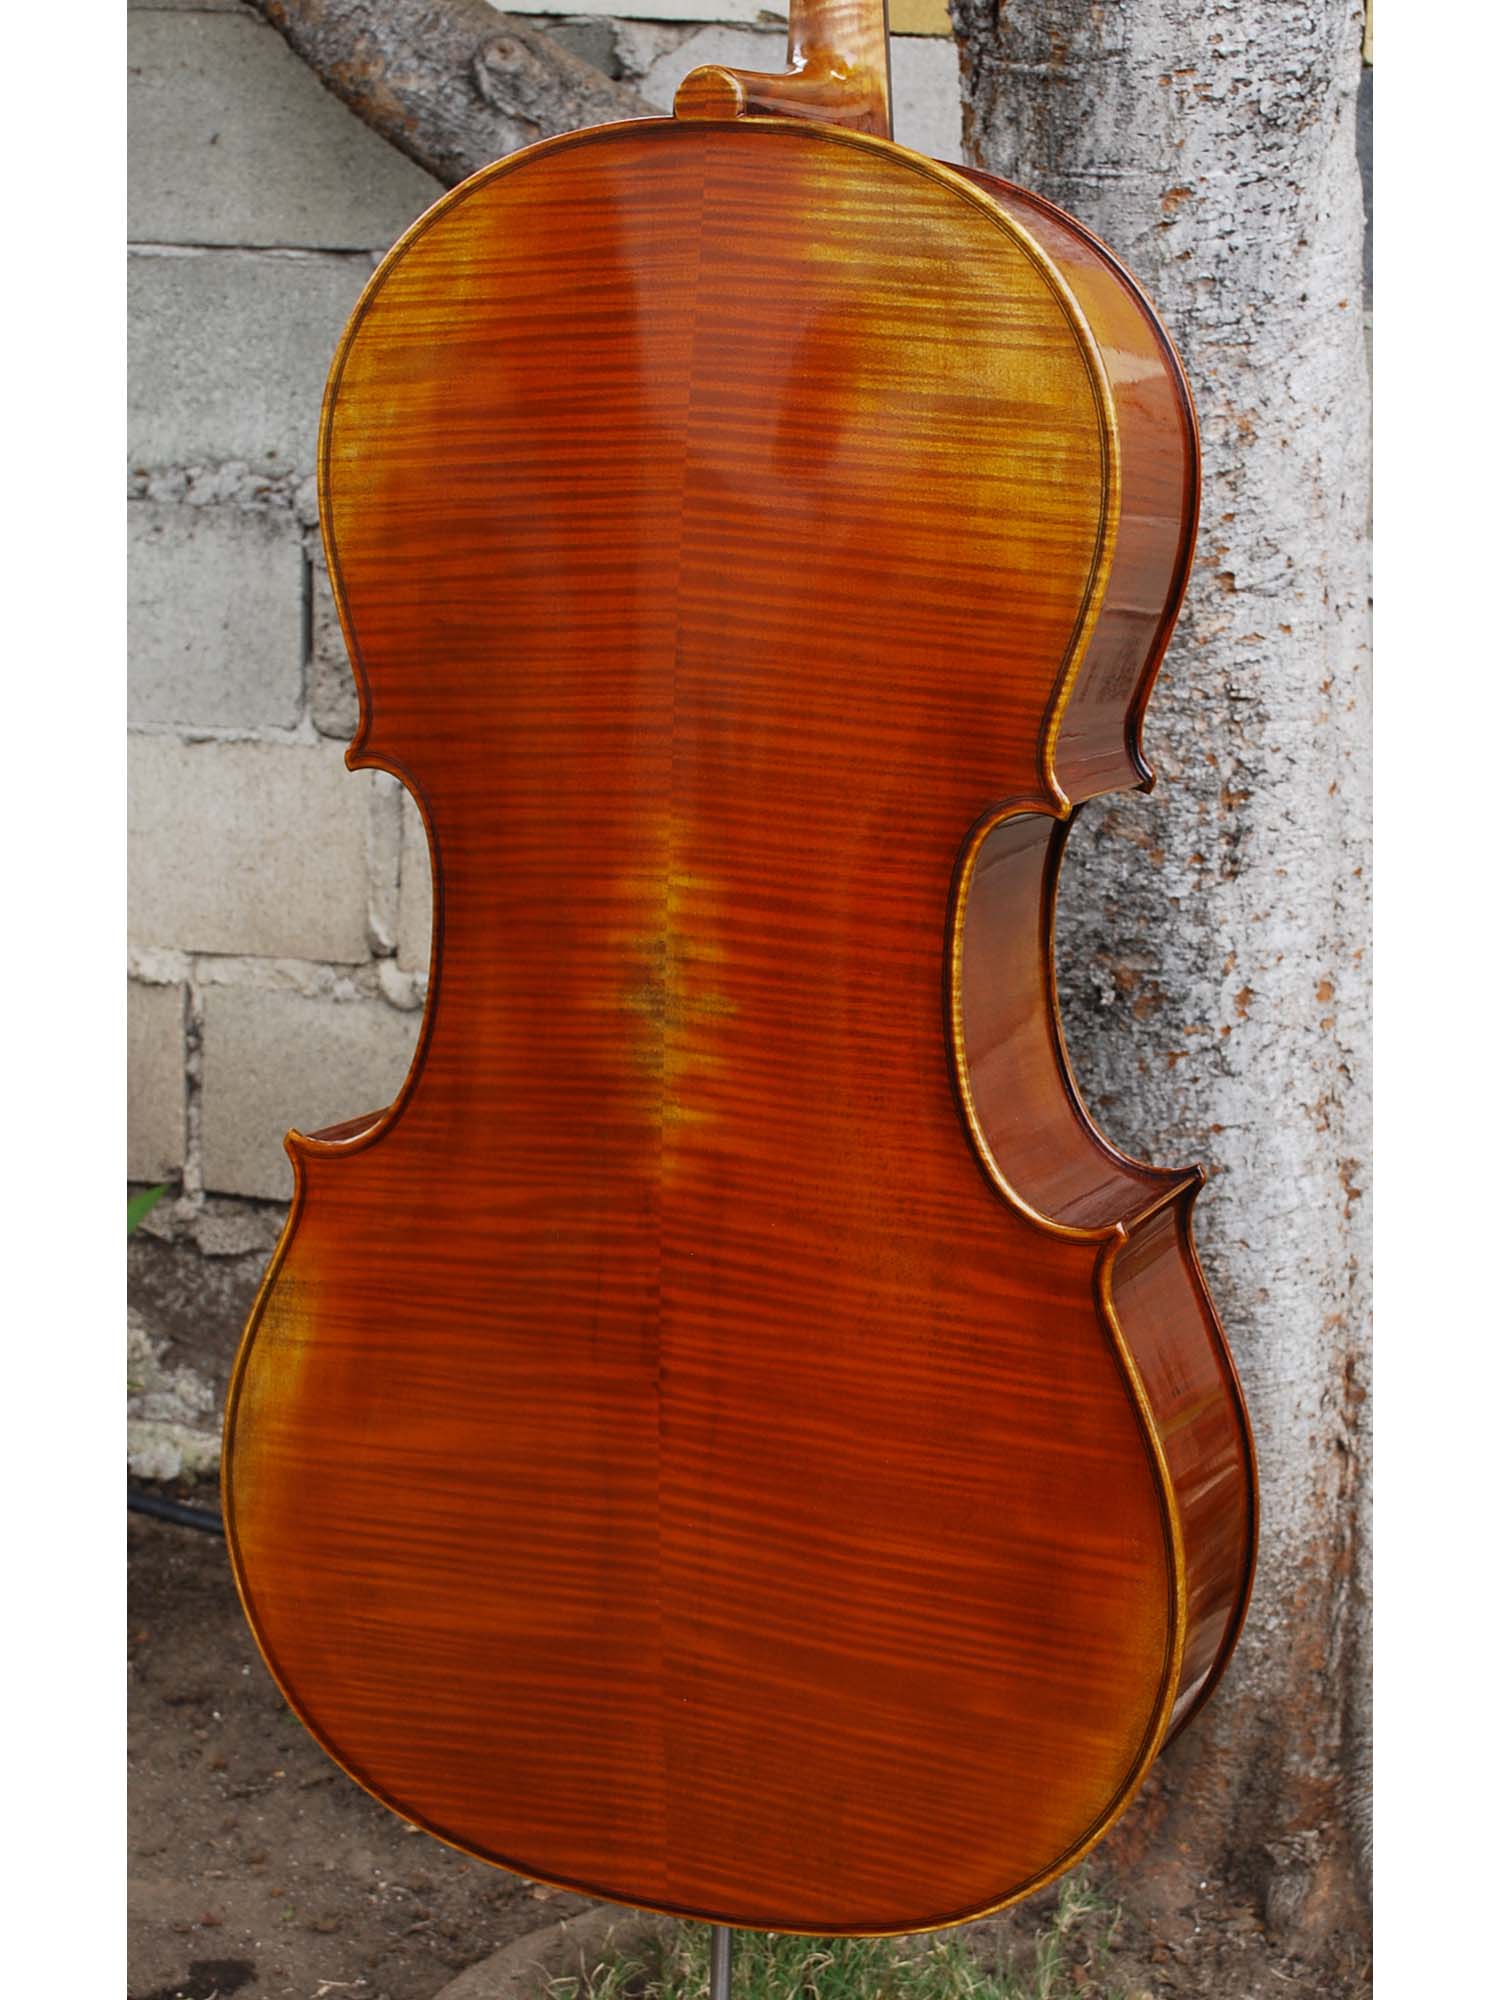 Archer 44C-600 Full Size Cello by Gear4music at Gear4music